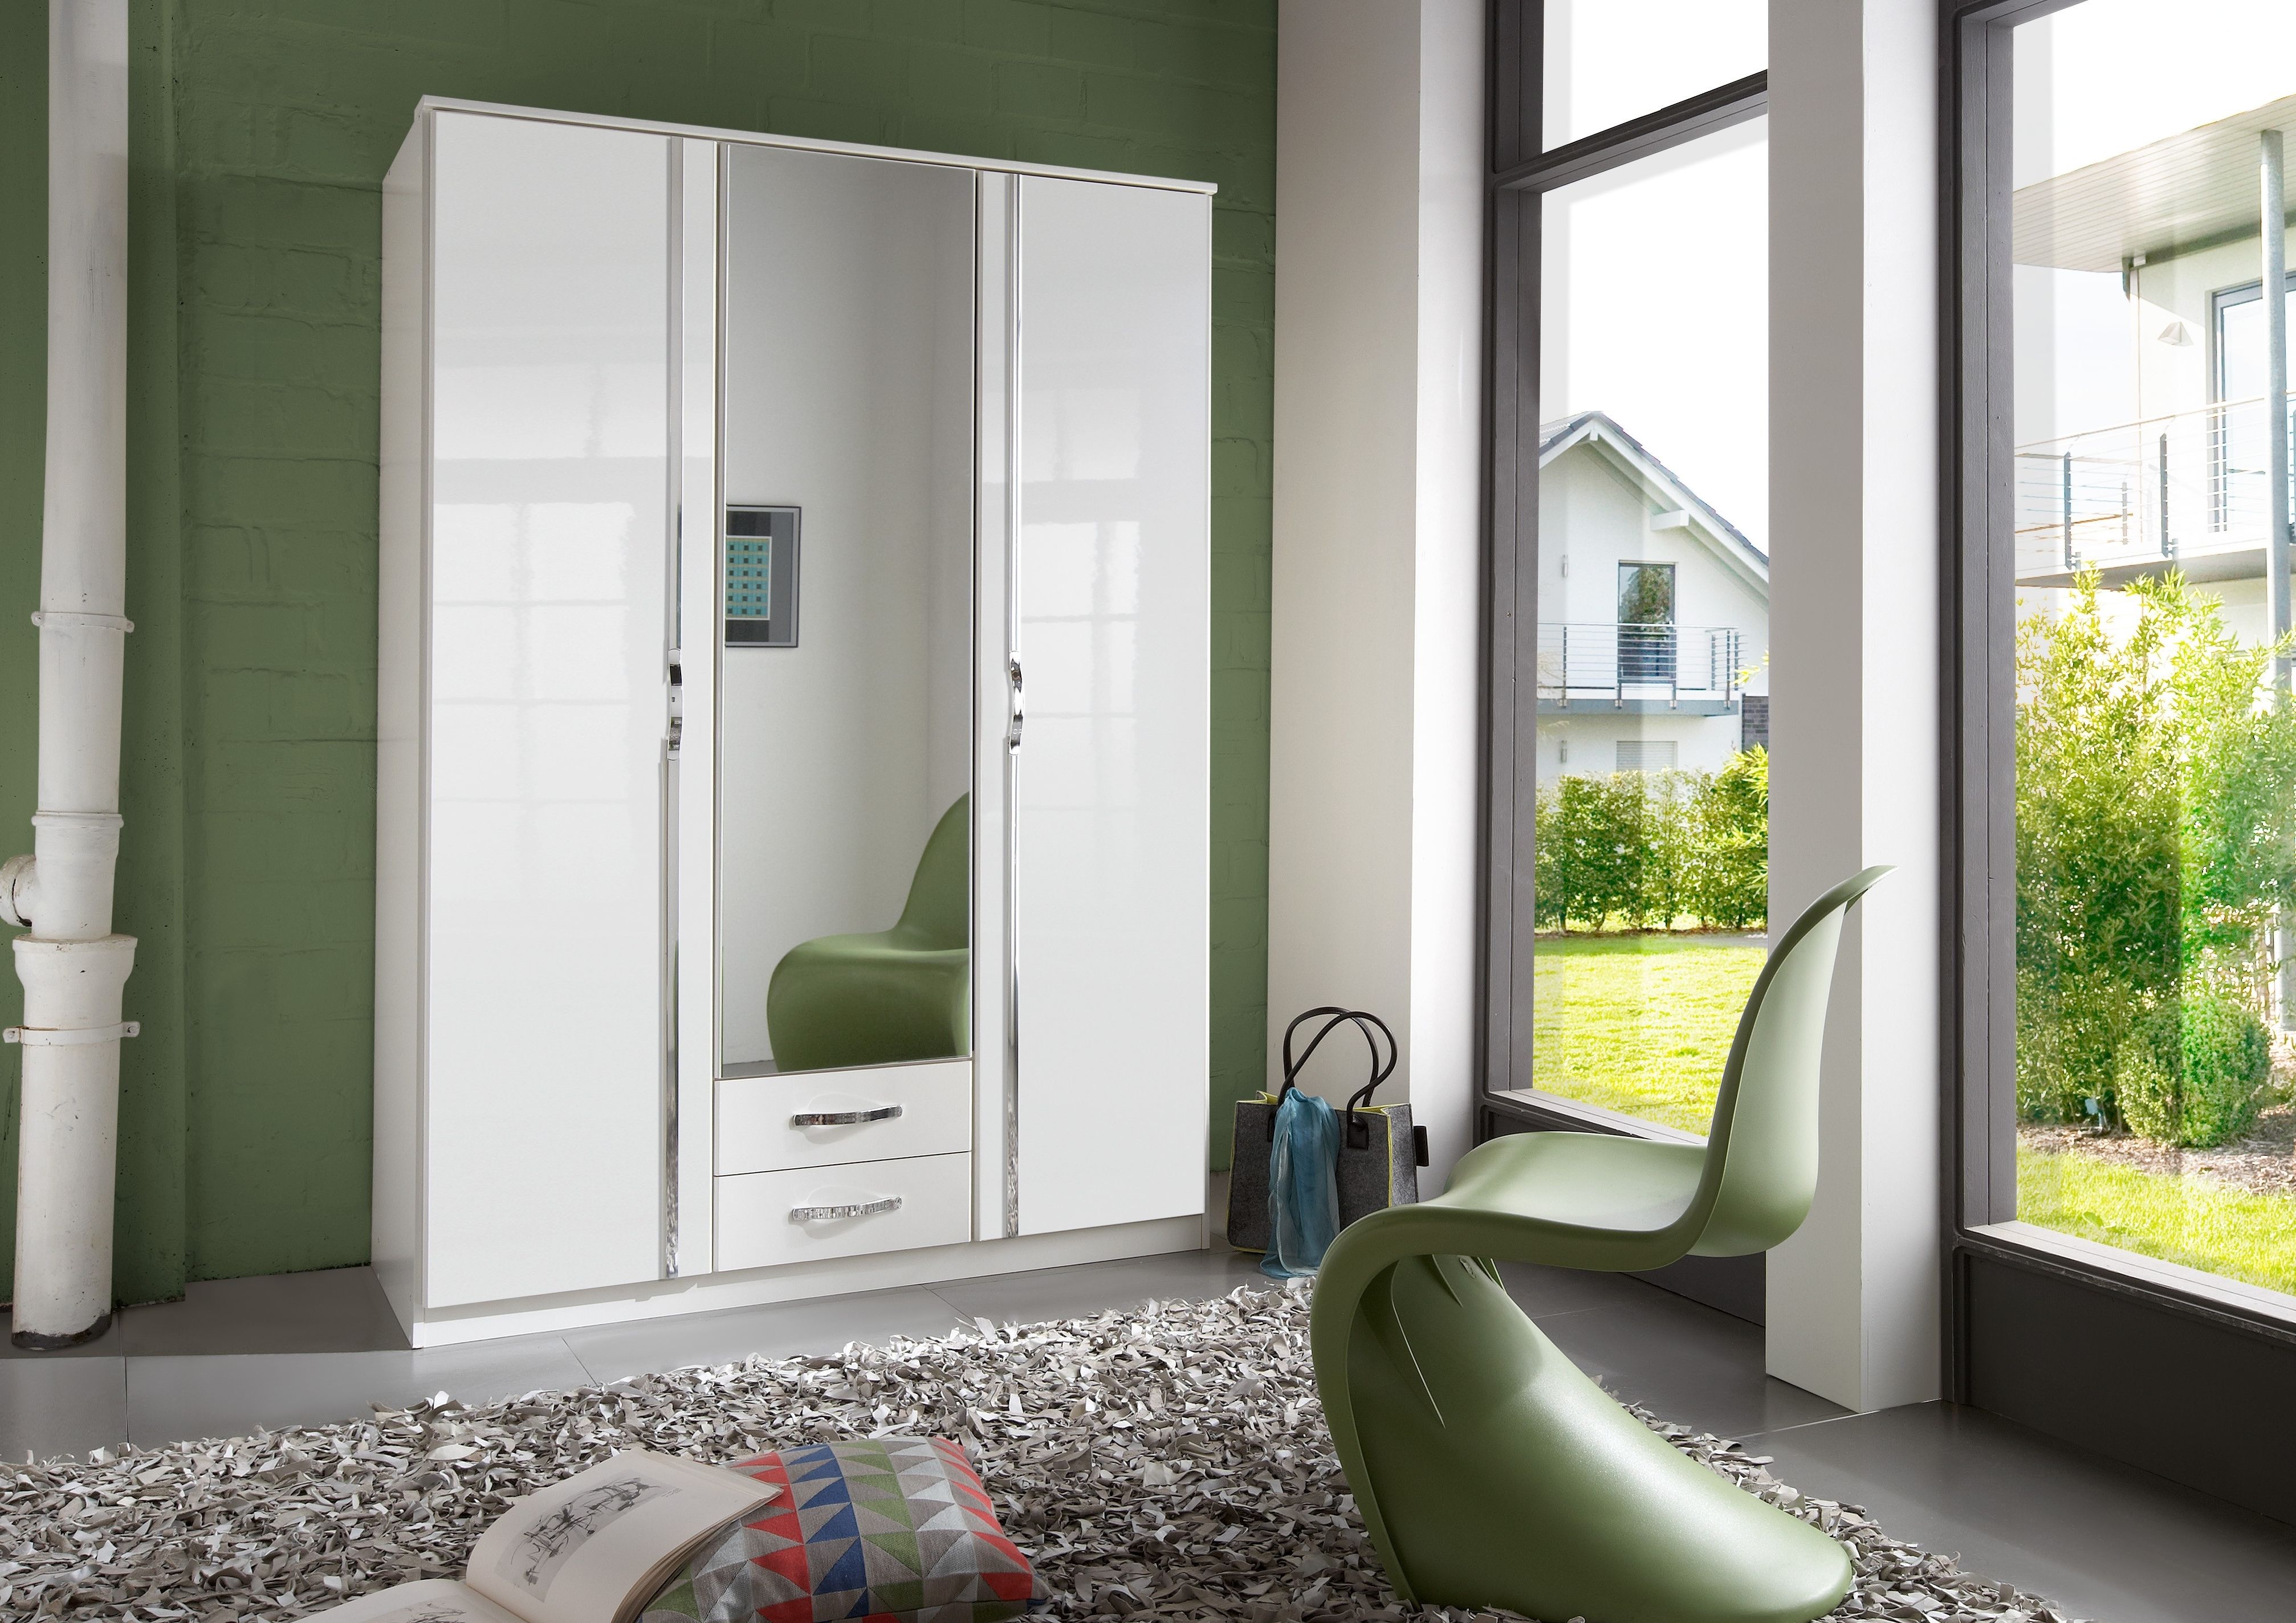 White Wardrobe With Mirror Amazon Drawers And Sliding Door Doors Within Recent 4 Door Wardrobes With Mirror And Drawers (View 10 of 15)